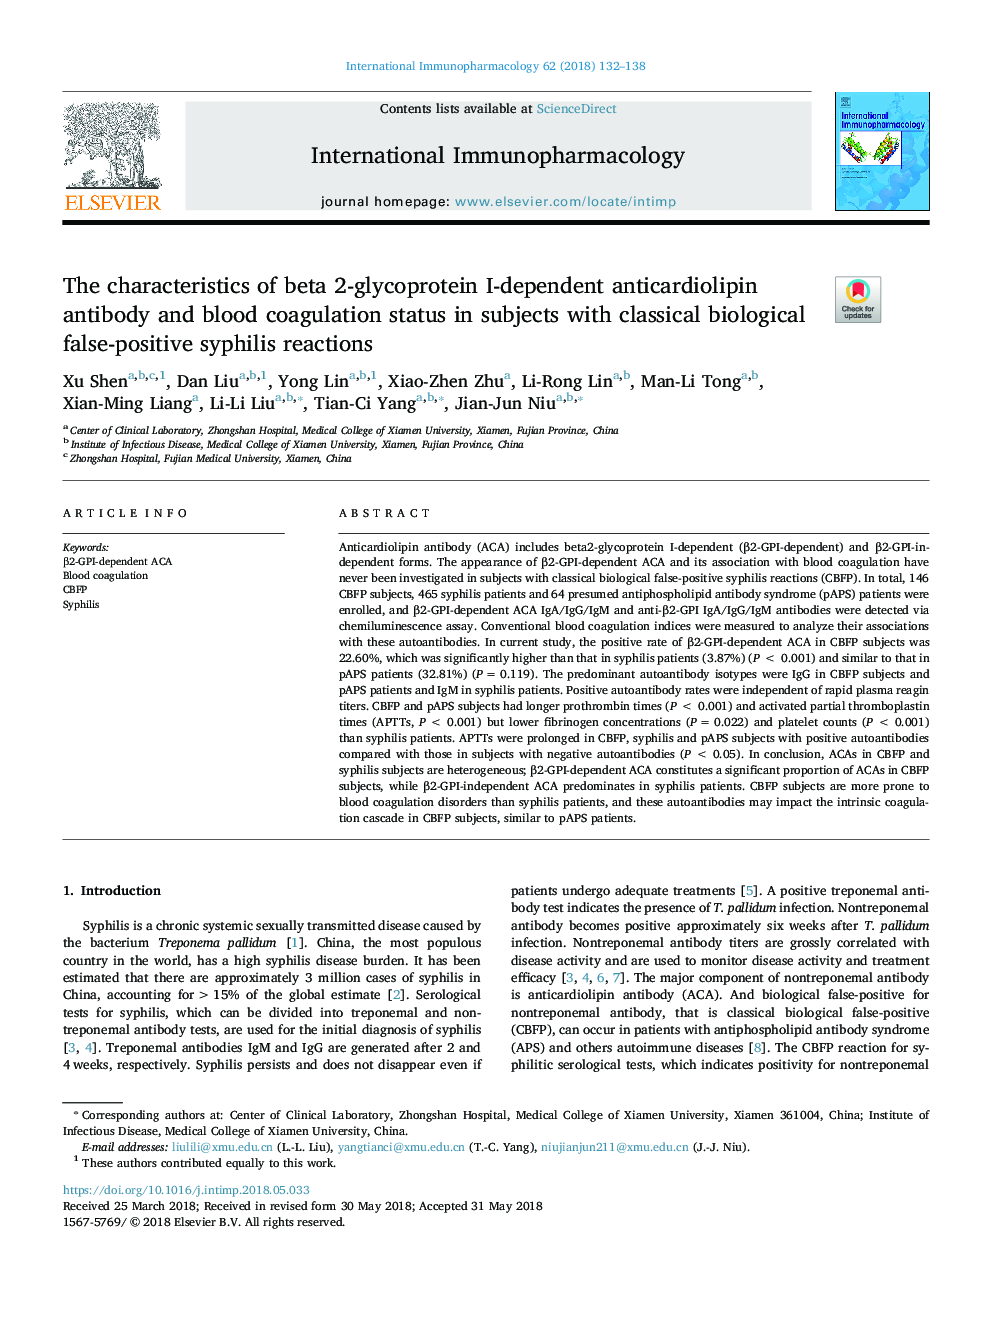 The characteristics of beta 2-glycoprotein I-dependent anticardiolipin antibody and blood coagulation status in subjects with classical biological false-positive syphilis reactions